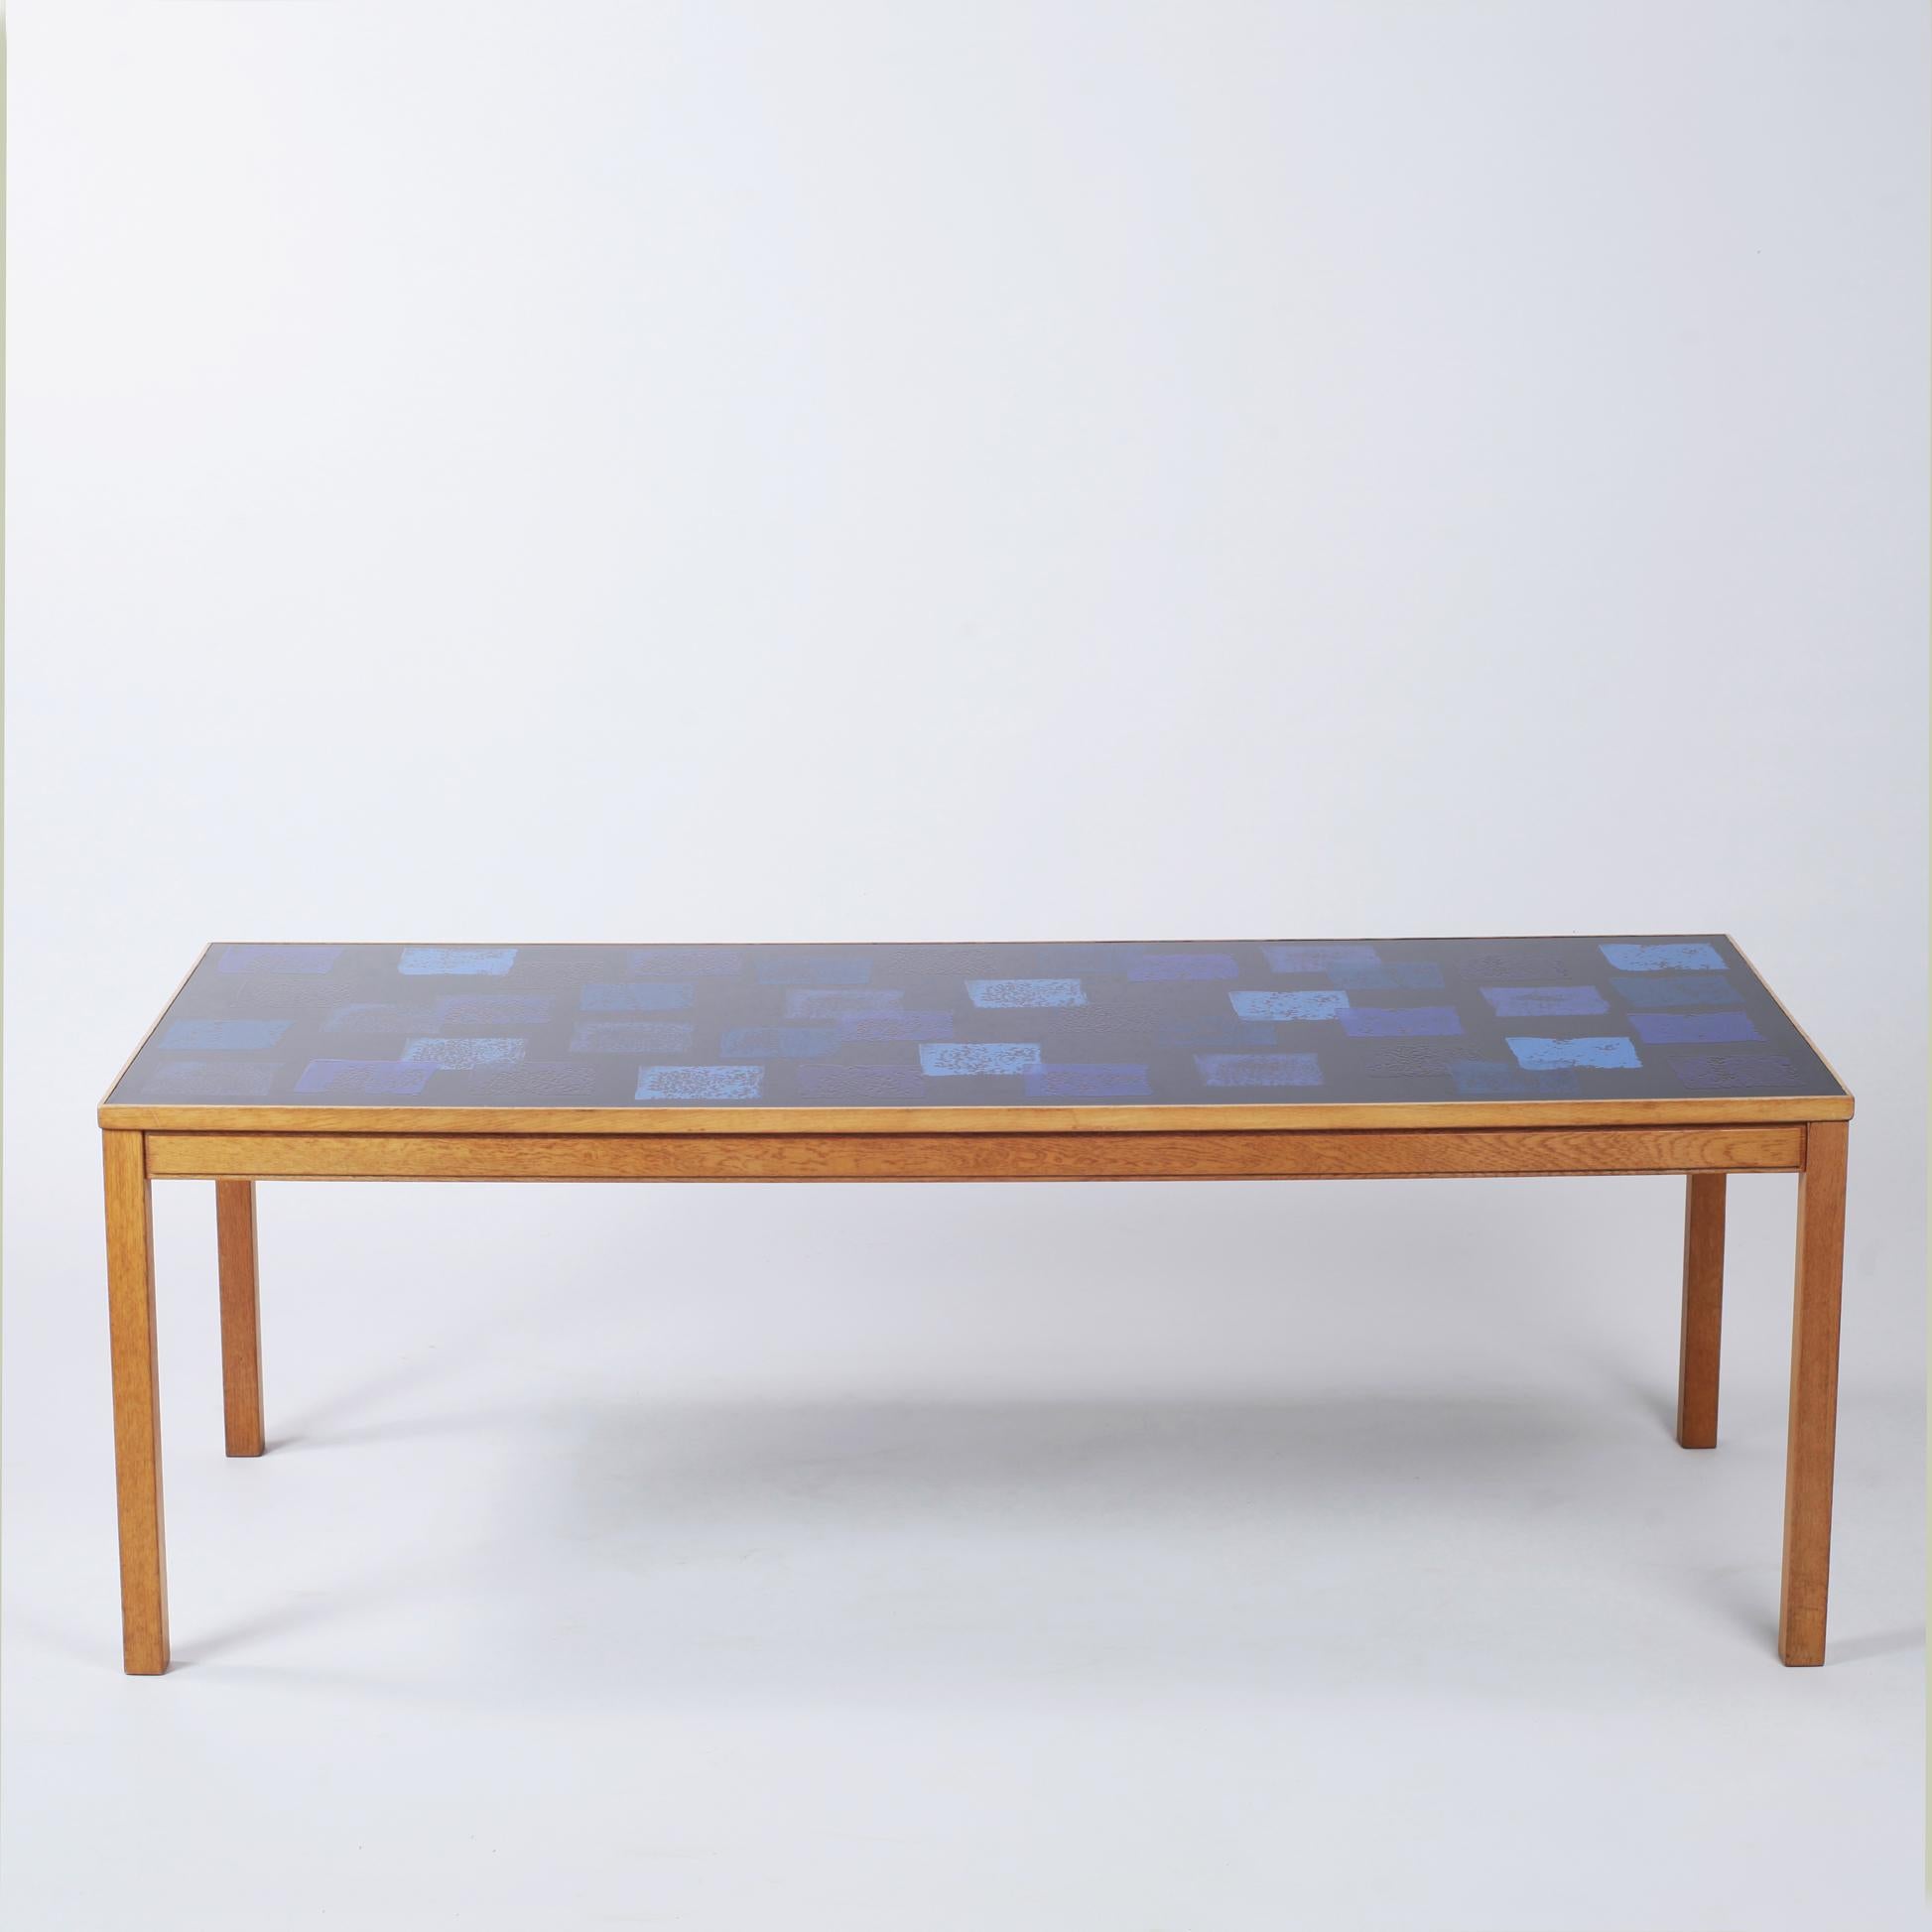 Swedish coffee table was designed by Algot P. Torneman and David Rosen for Nordiska Kompaniet during the 1960s. The oak structure supports an enamel top that is patterns with blue squares on a black background. The manufacturers label features on